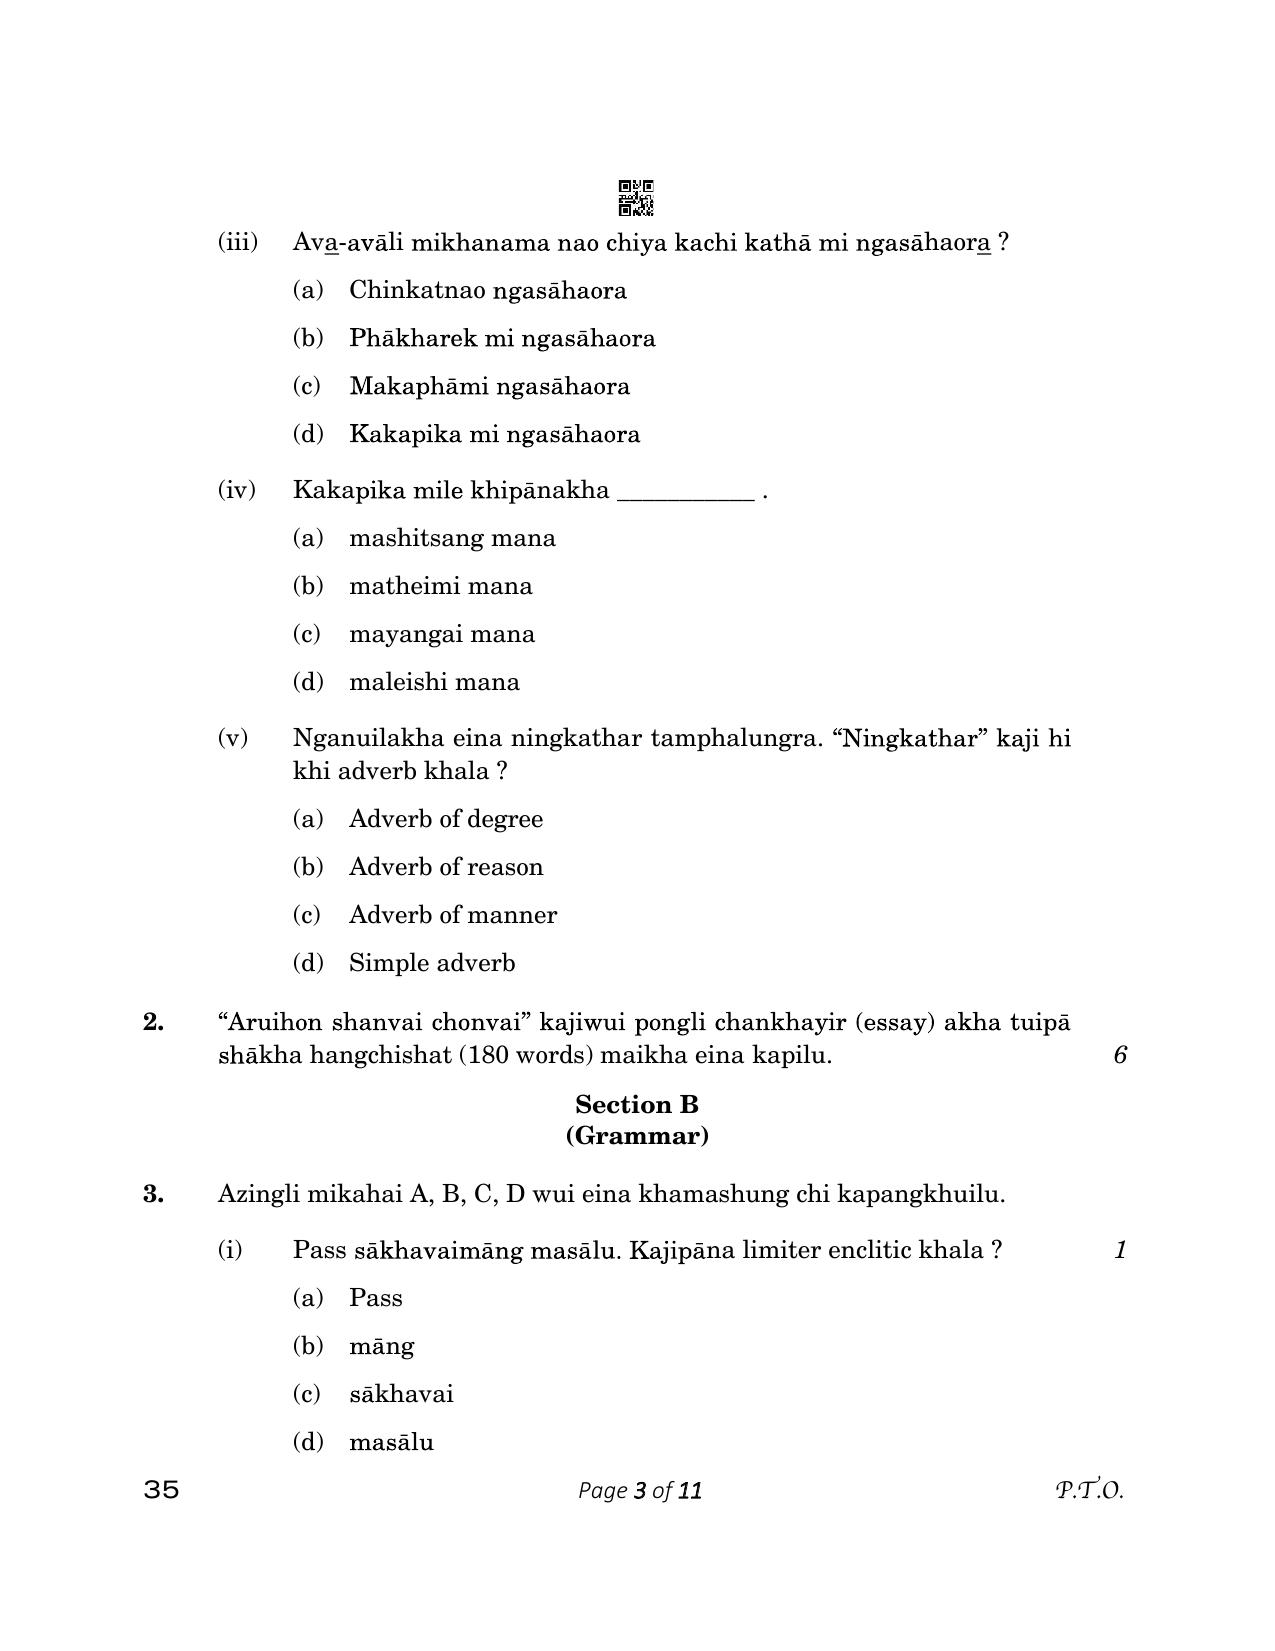 CBSE Class 12 35_Tangkhul 2023 Question Paper - Page 3